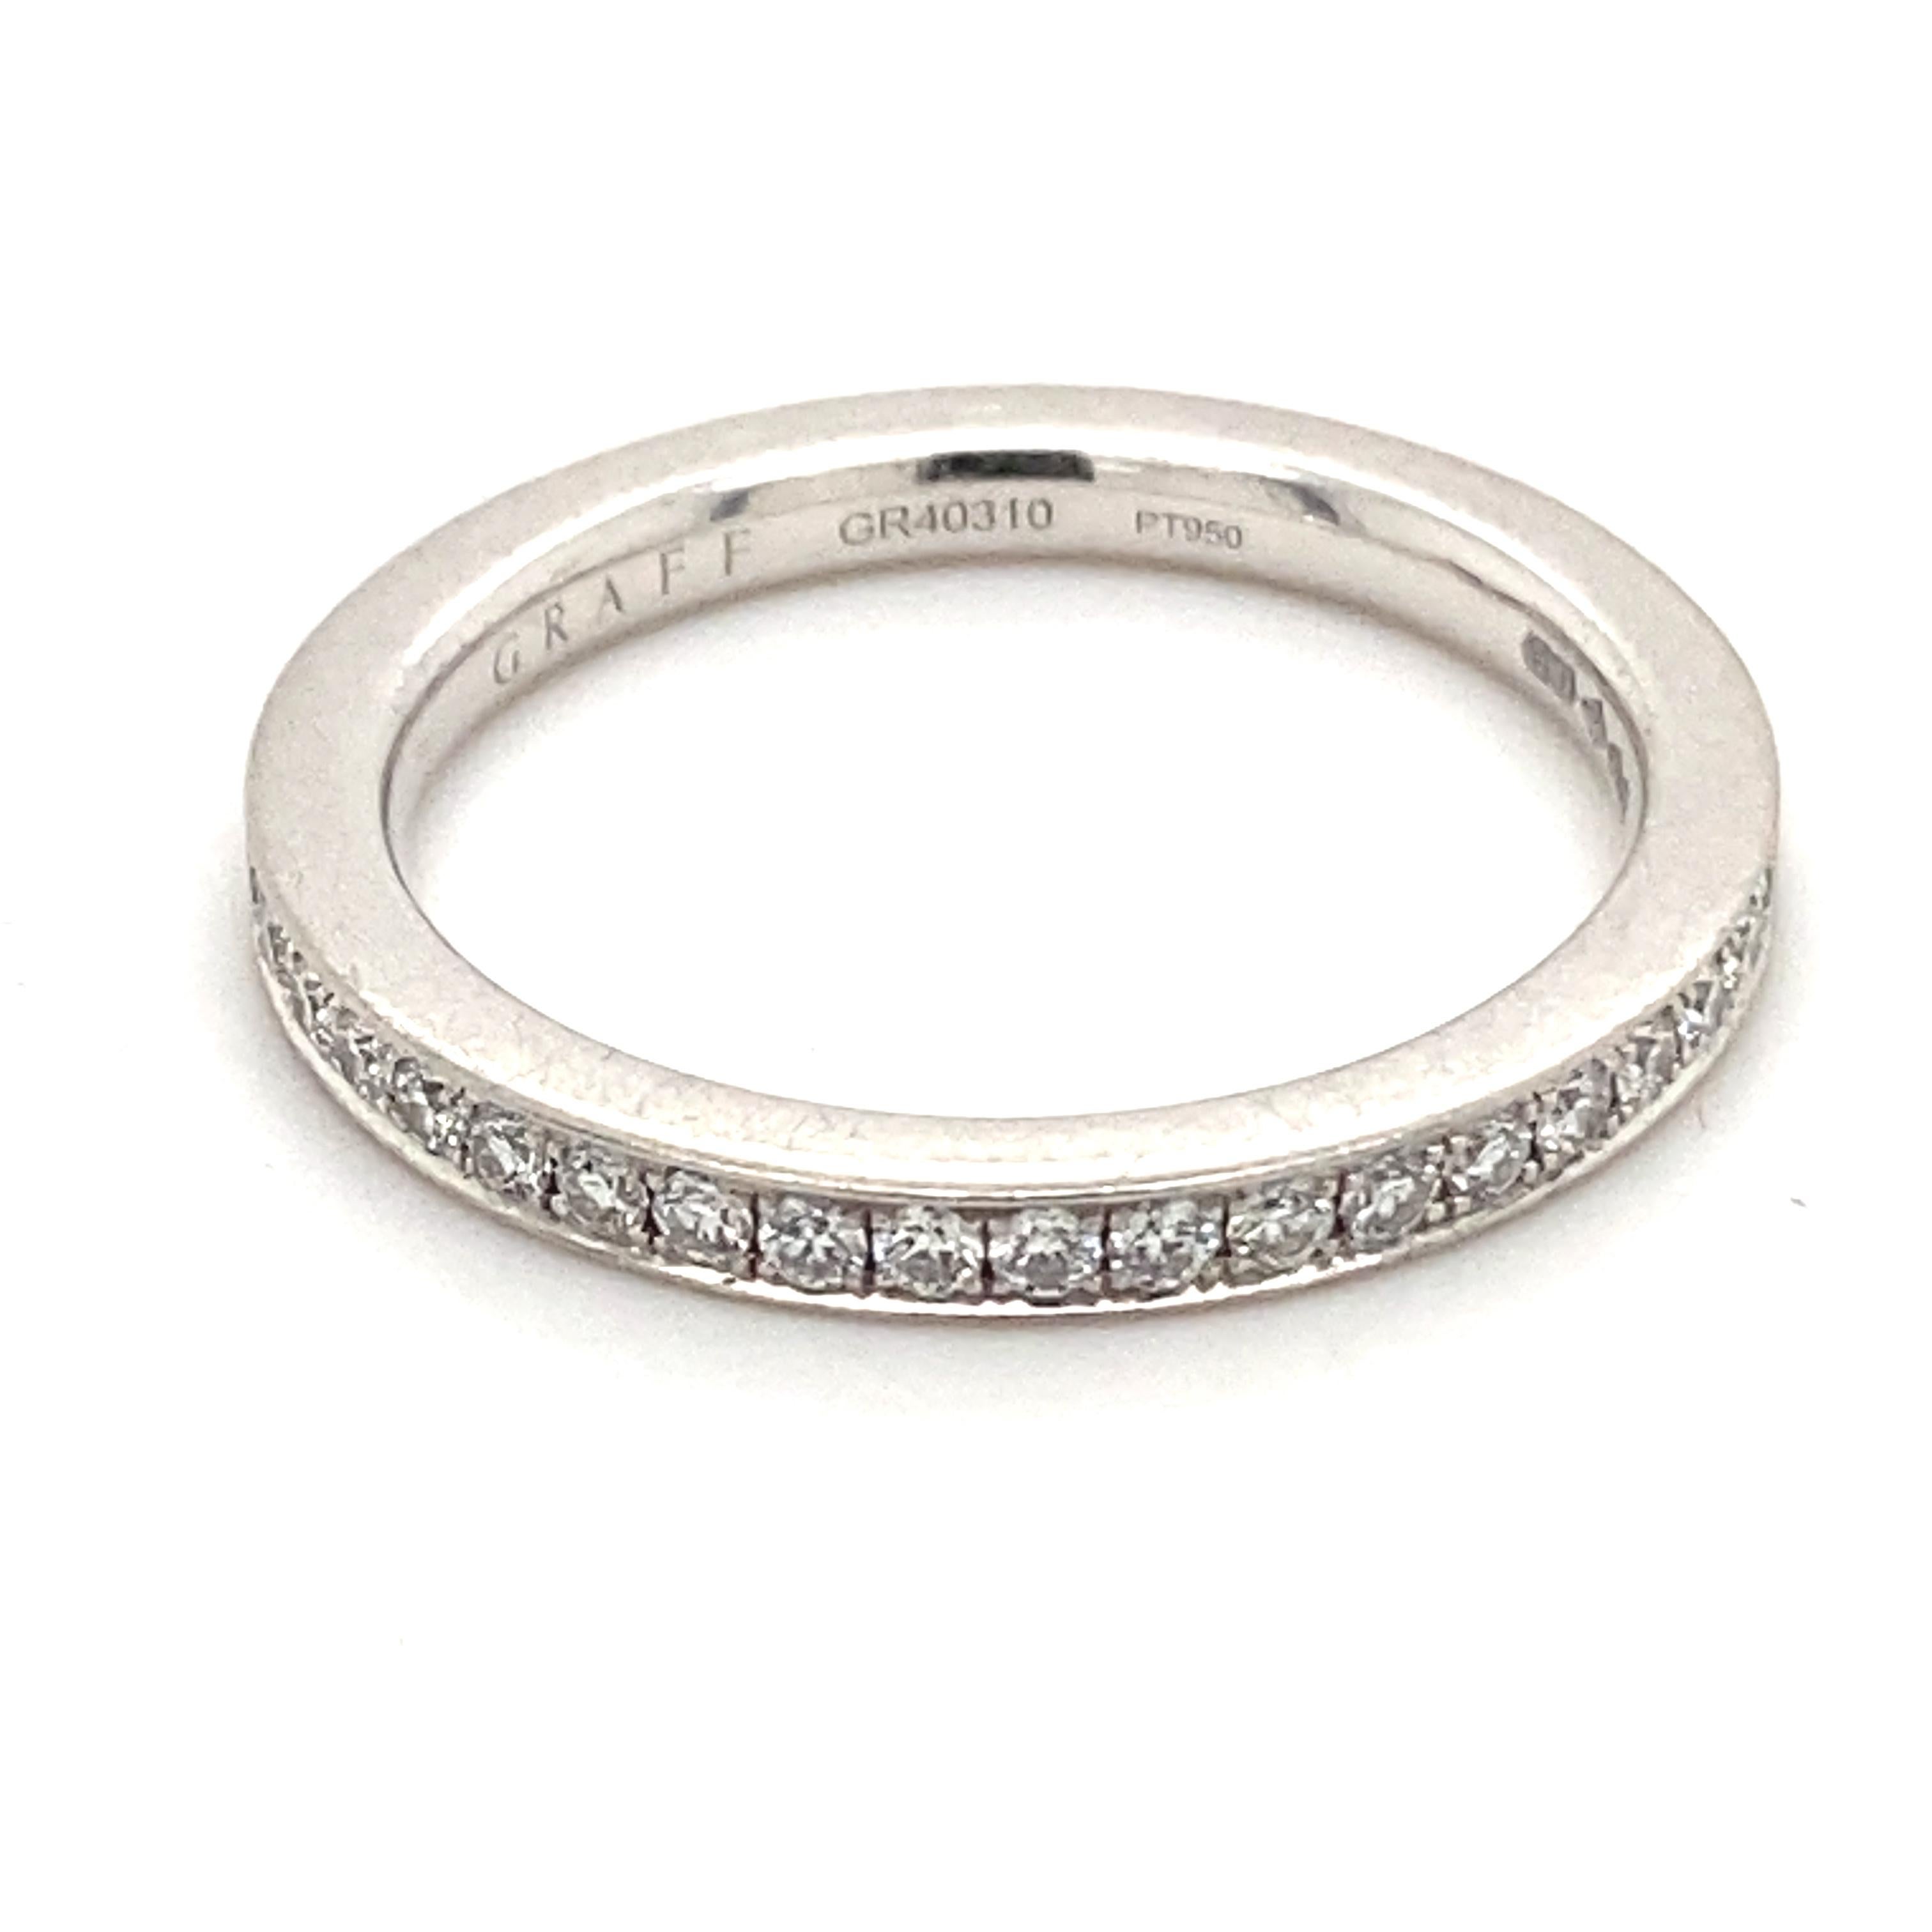 A Graff diamond platinum 'Thread Set' eternity ring, circa 2017.

This elegant grain set diamond wedding band from The 'Thread Set' collection by Graff features diamonds which are framed either side by a fine band of plain polished platinum,